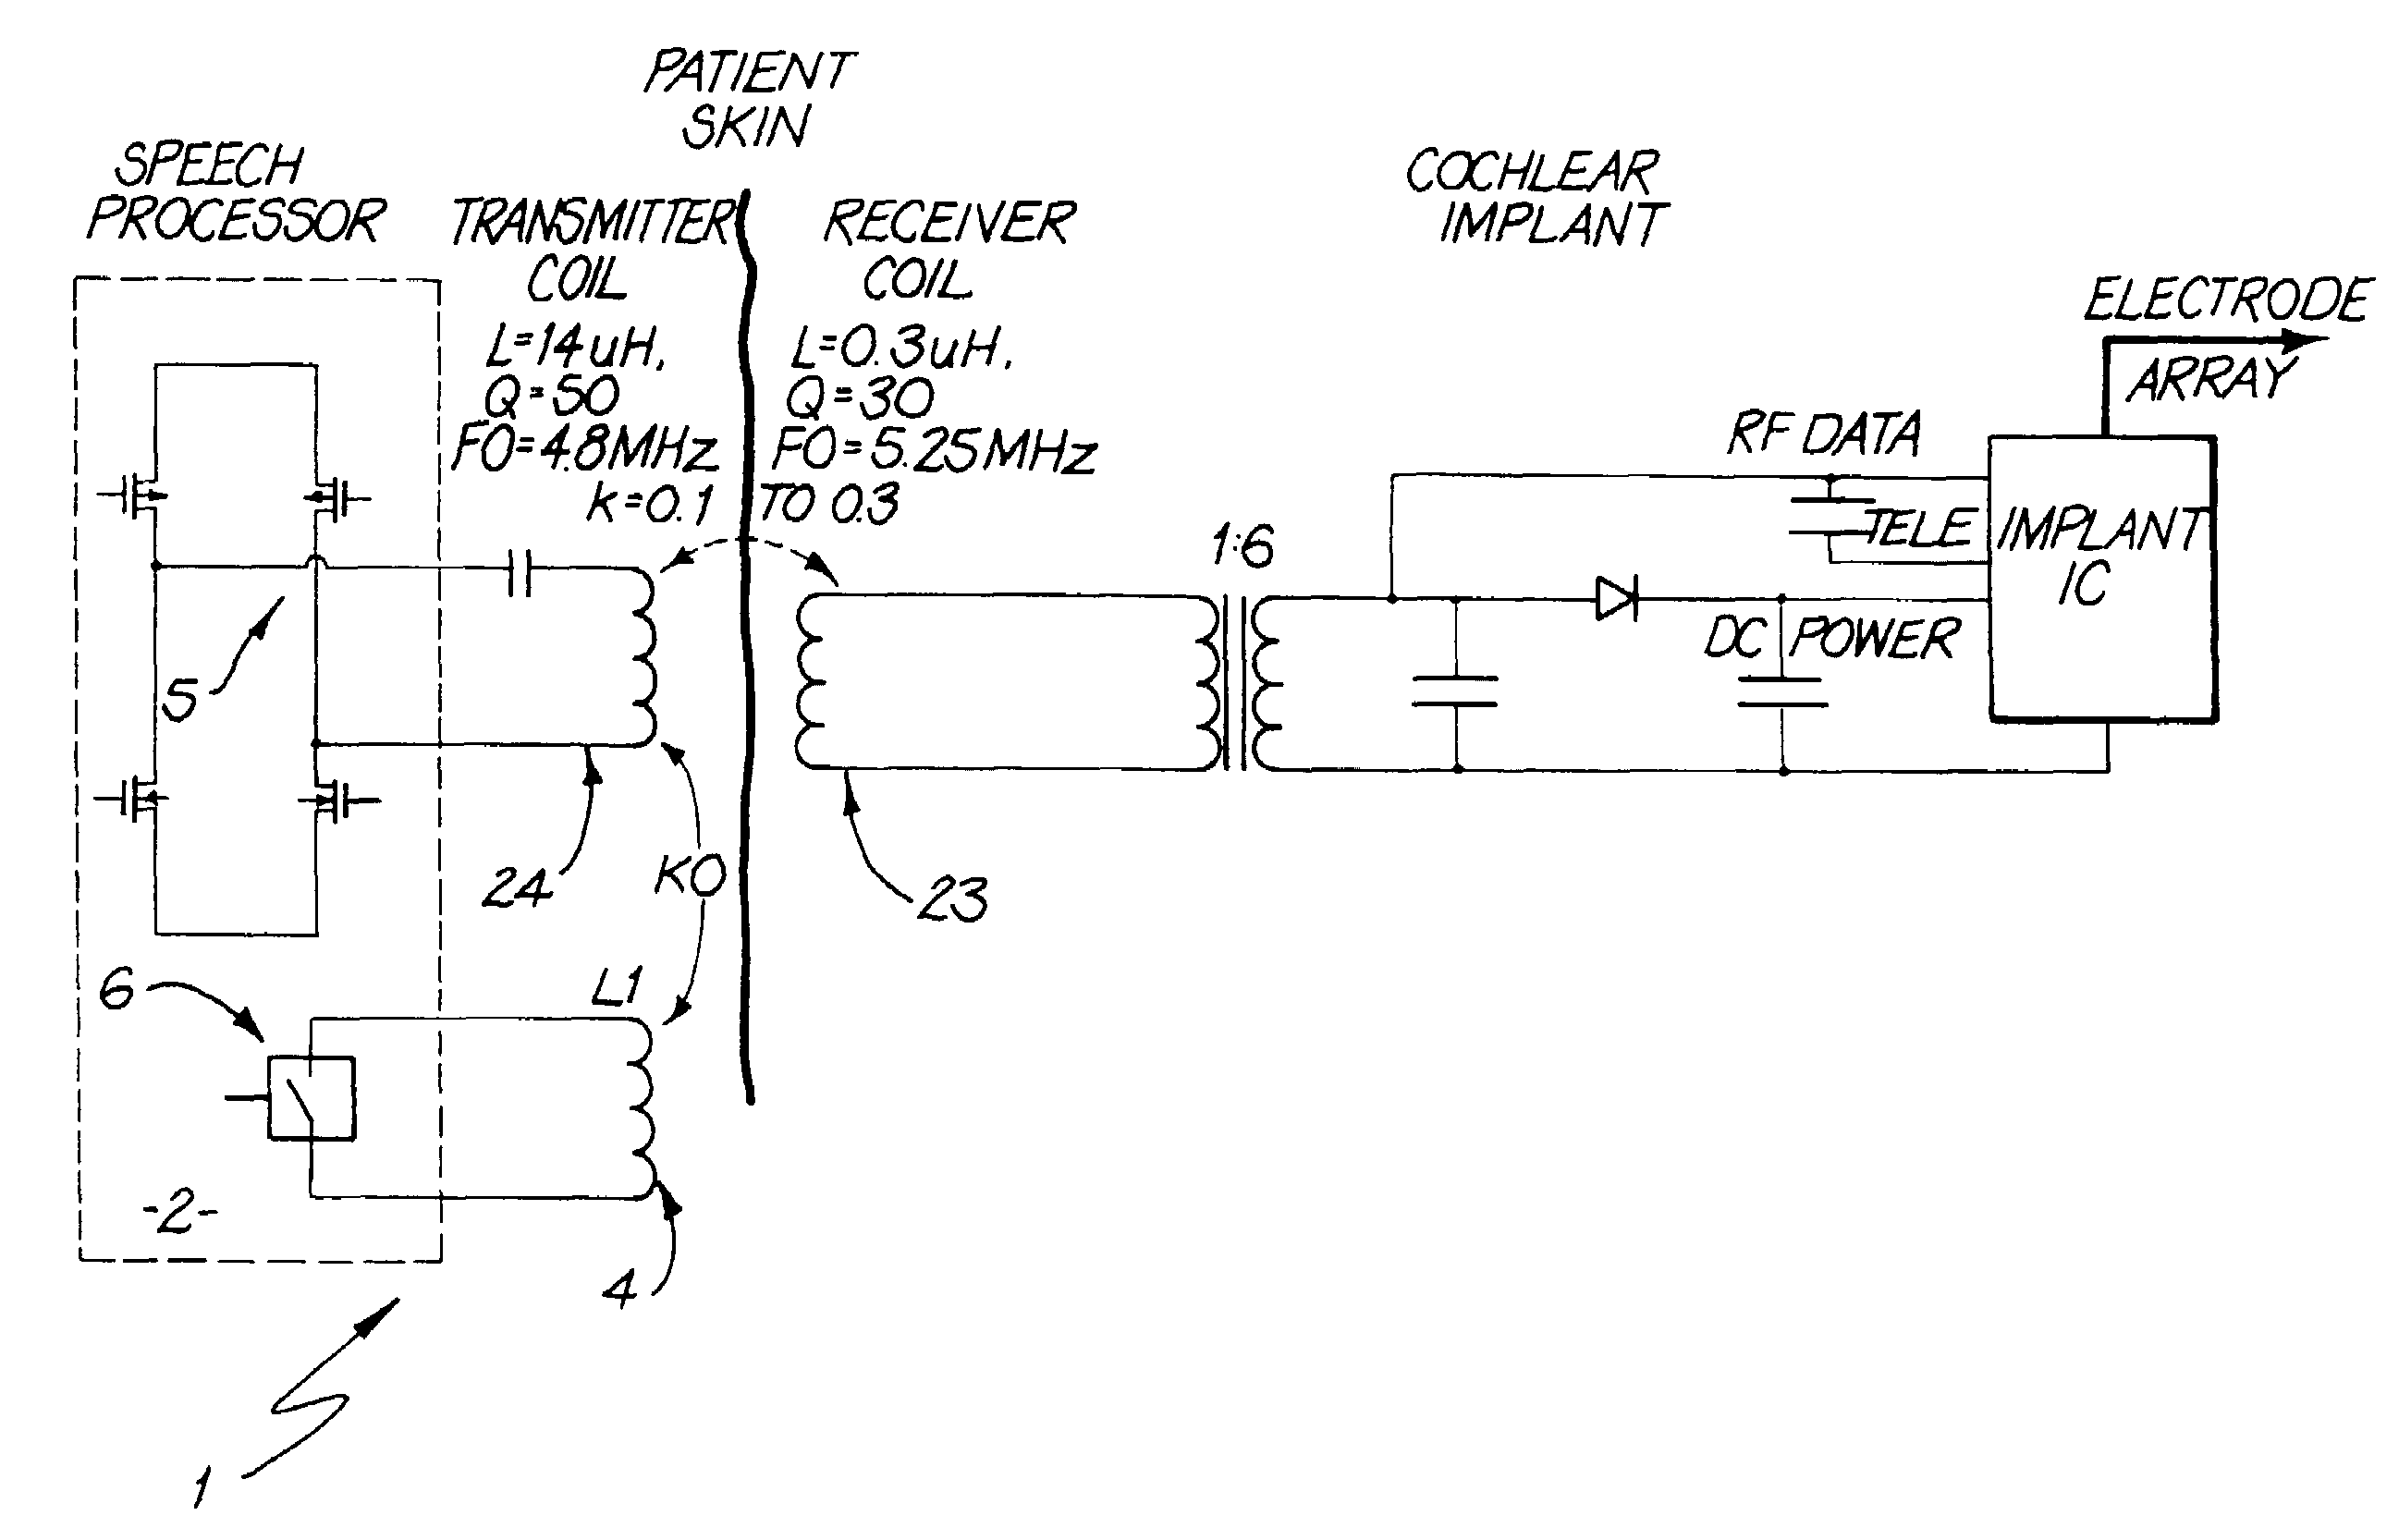 Voltage overshoot protection